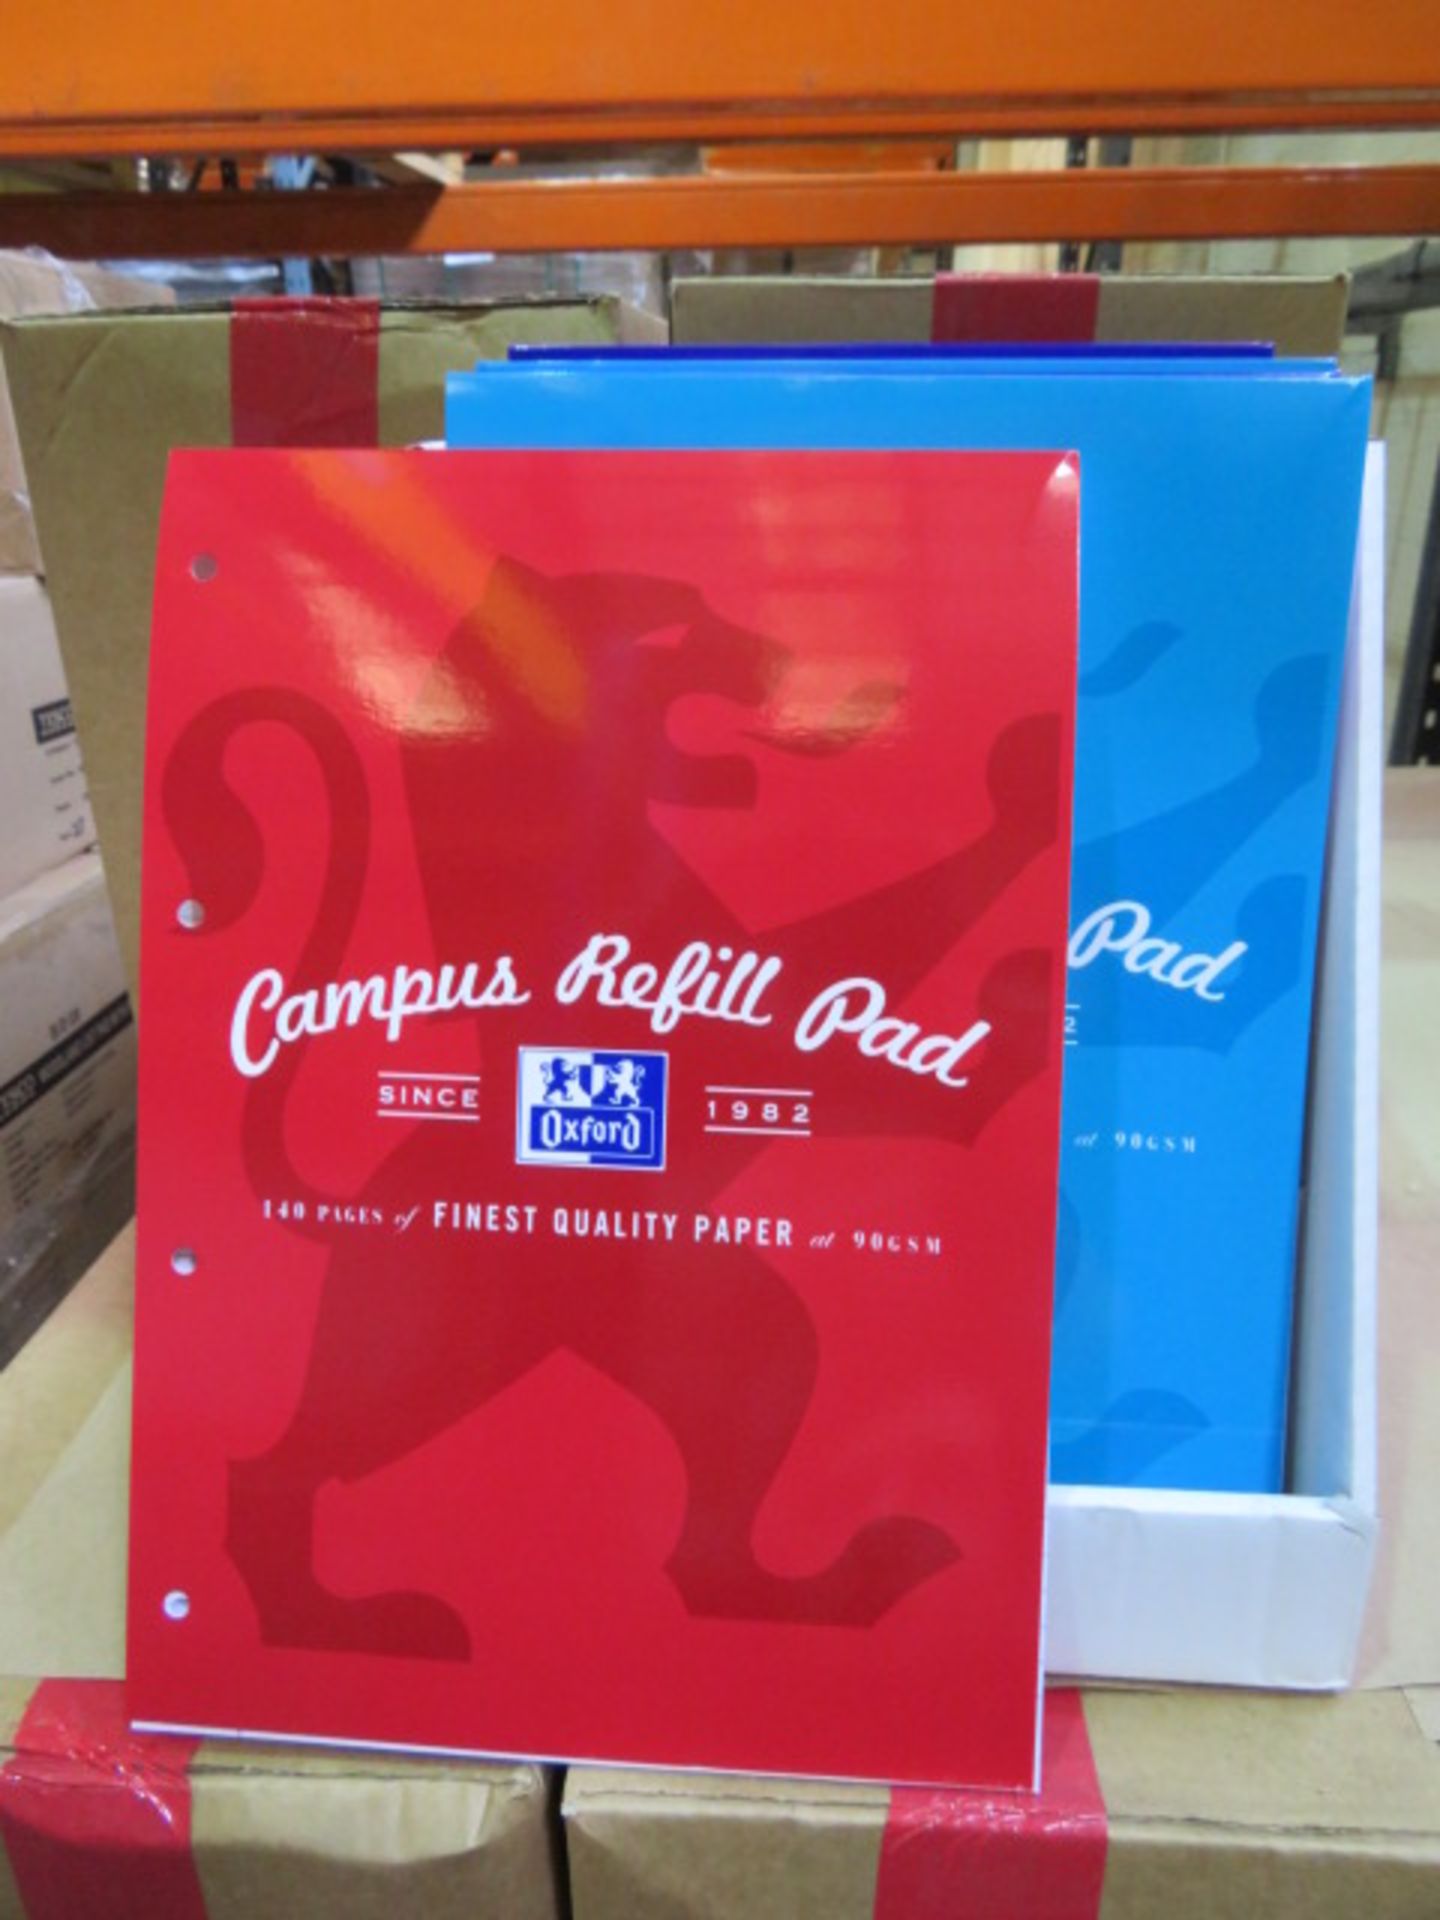 60 x BRAND NEW OXFORD CAMPUS REFIL PADS A4. EACH CONTAINS 140 PAGES OF FINEST QUALITY 90GSM PAPER